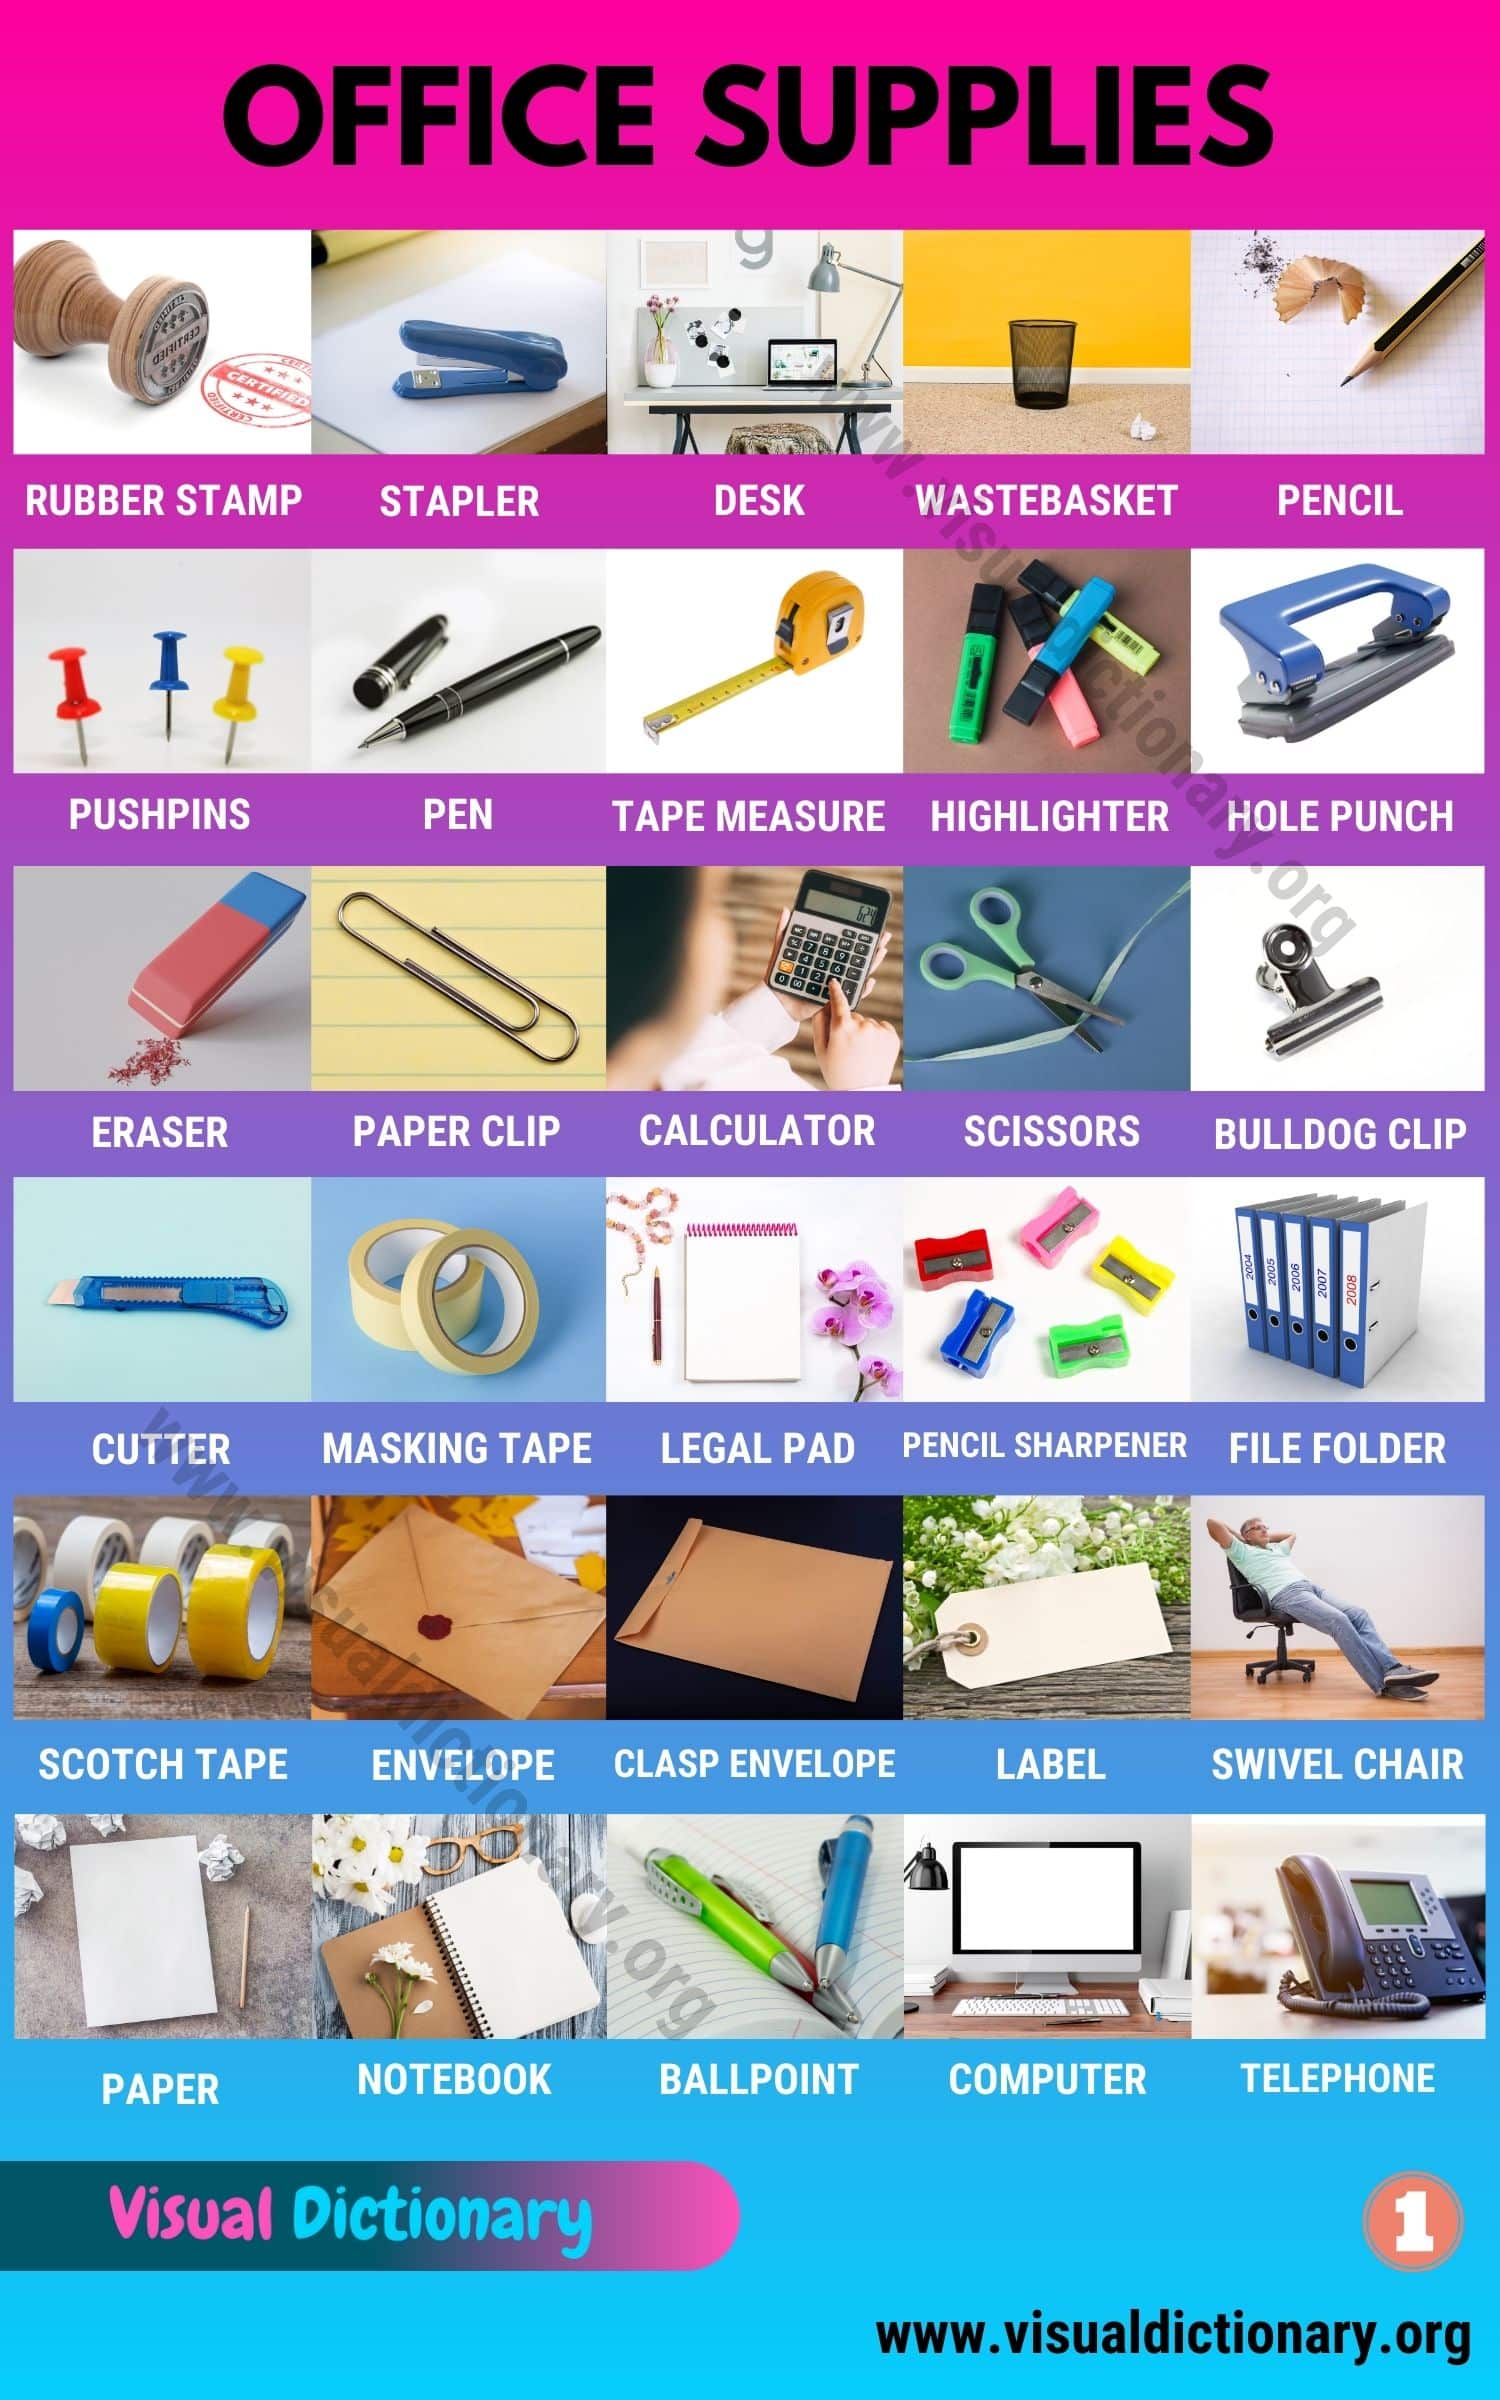 Office Supplies Glossary of 65 Useful Office Furniture that Every